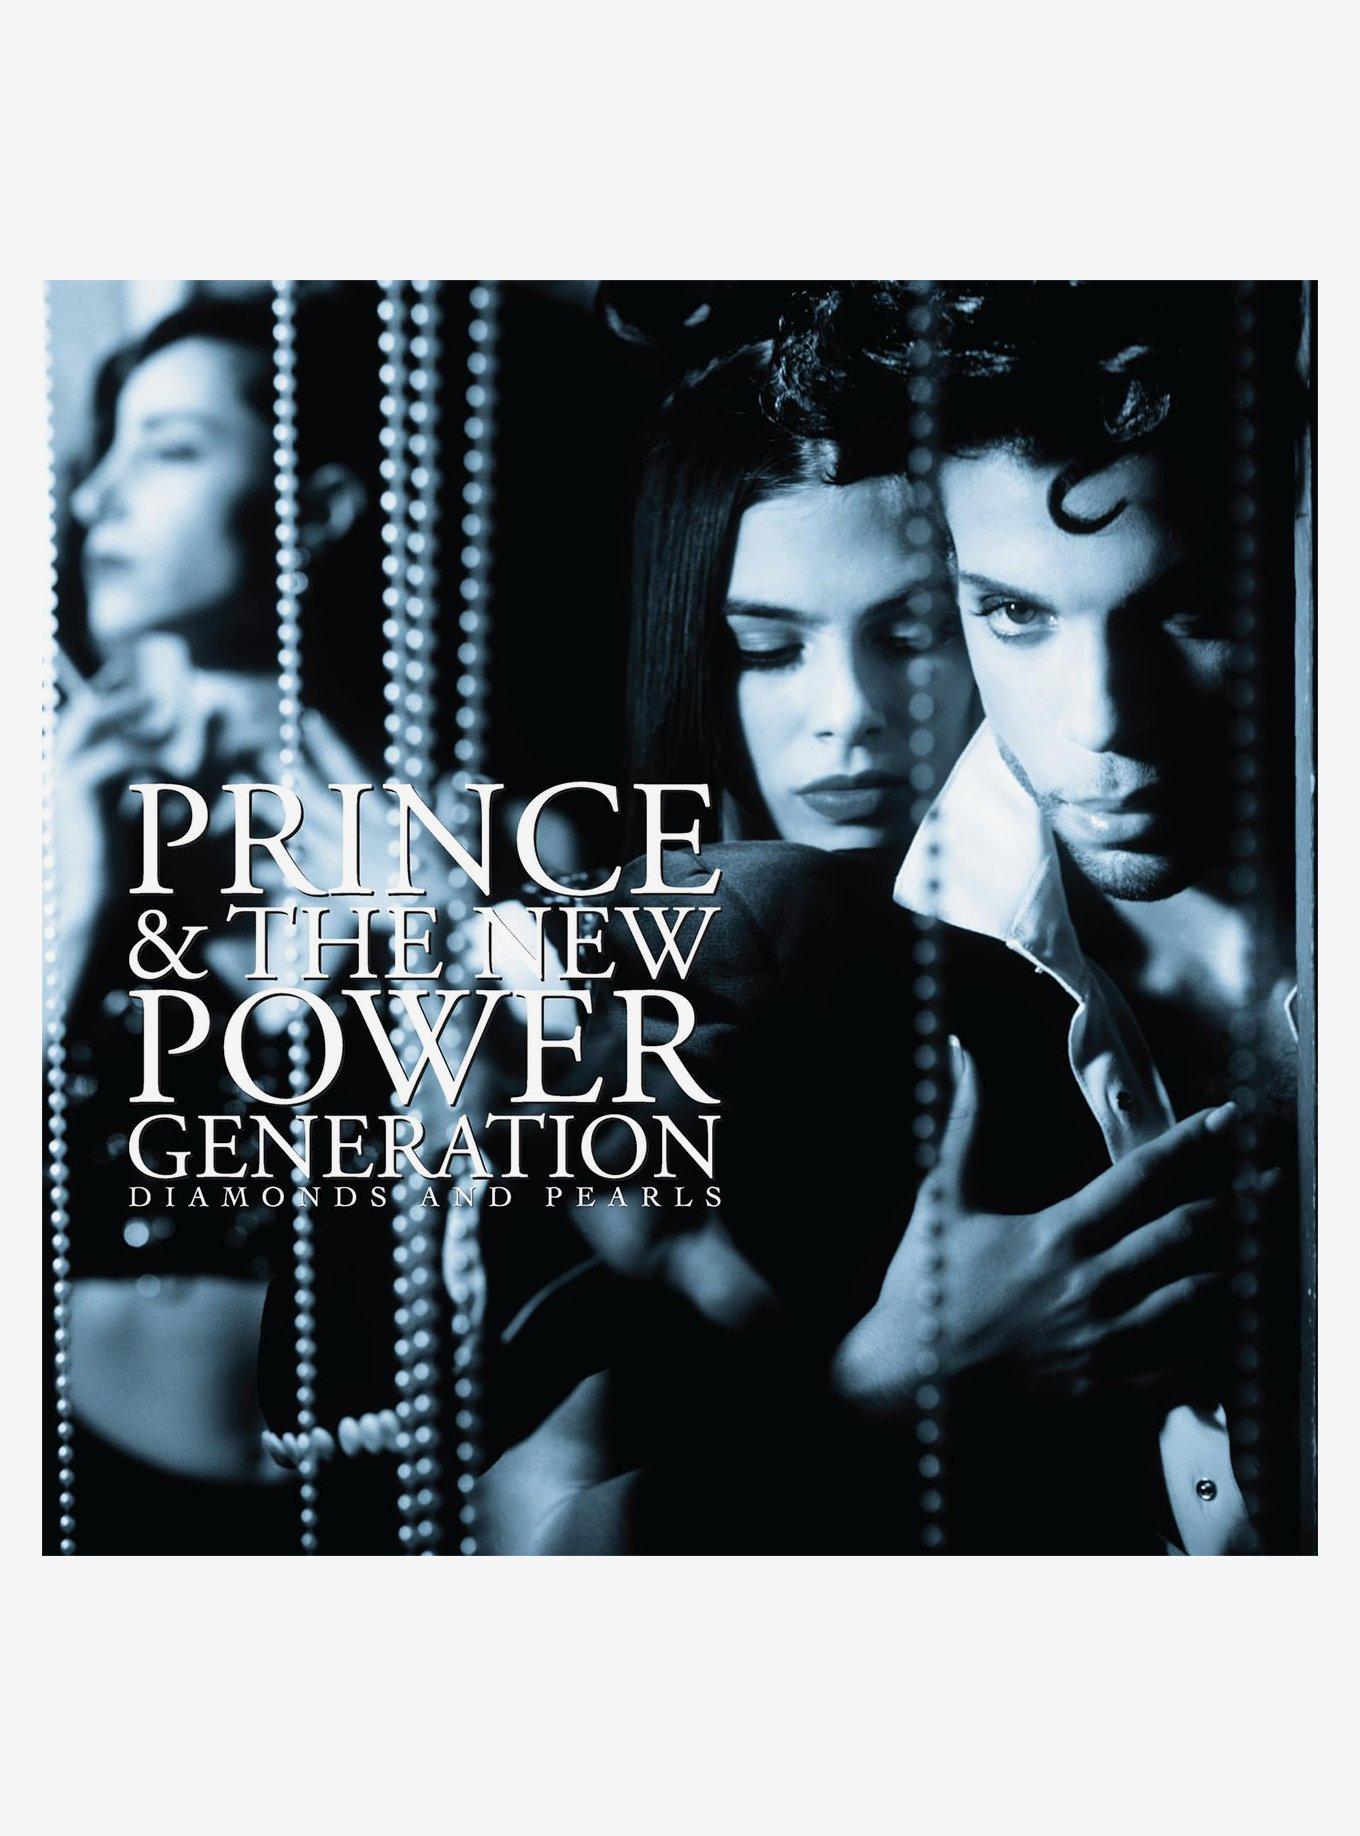 Prince & New Power Generation Diamonds And Pearls Deluxe Vinyl LP